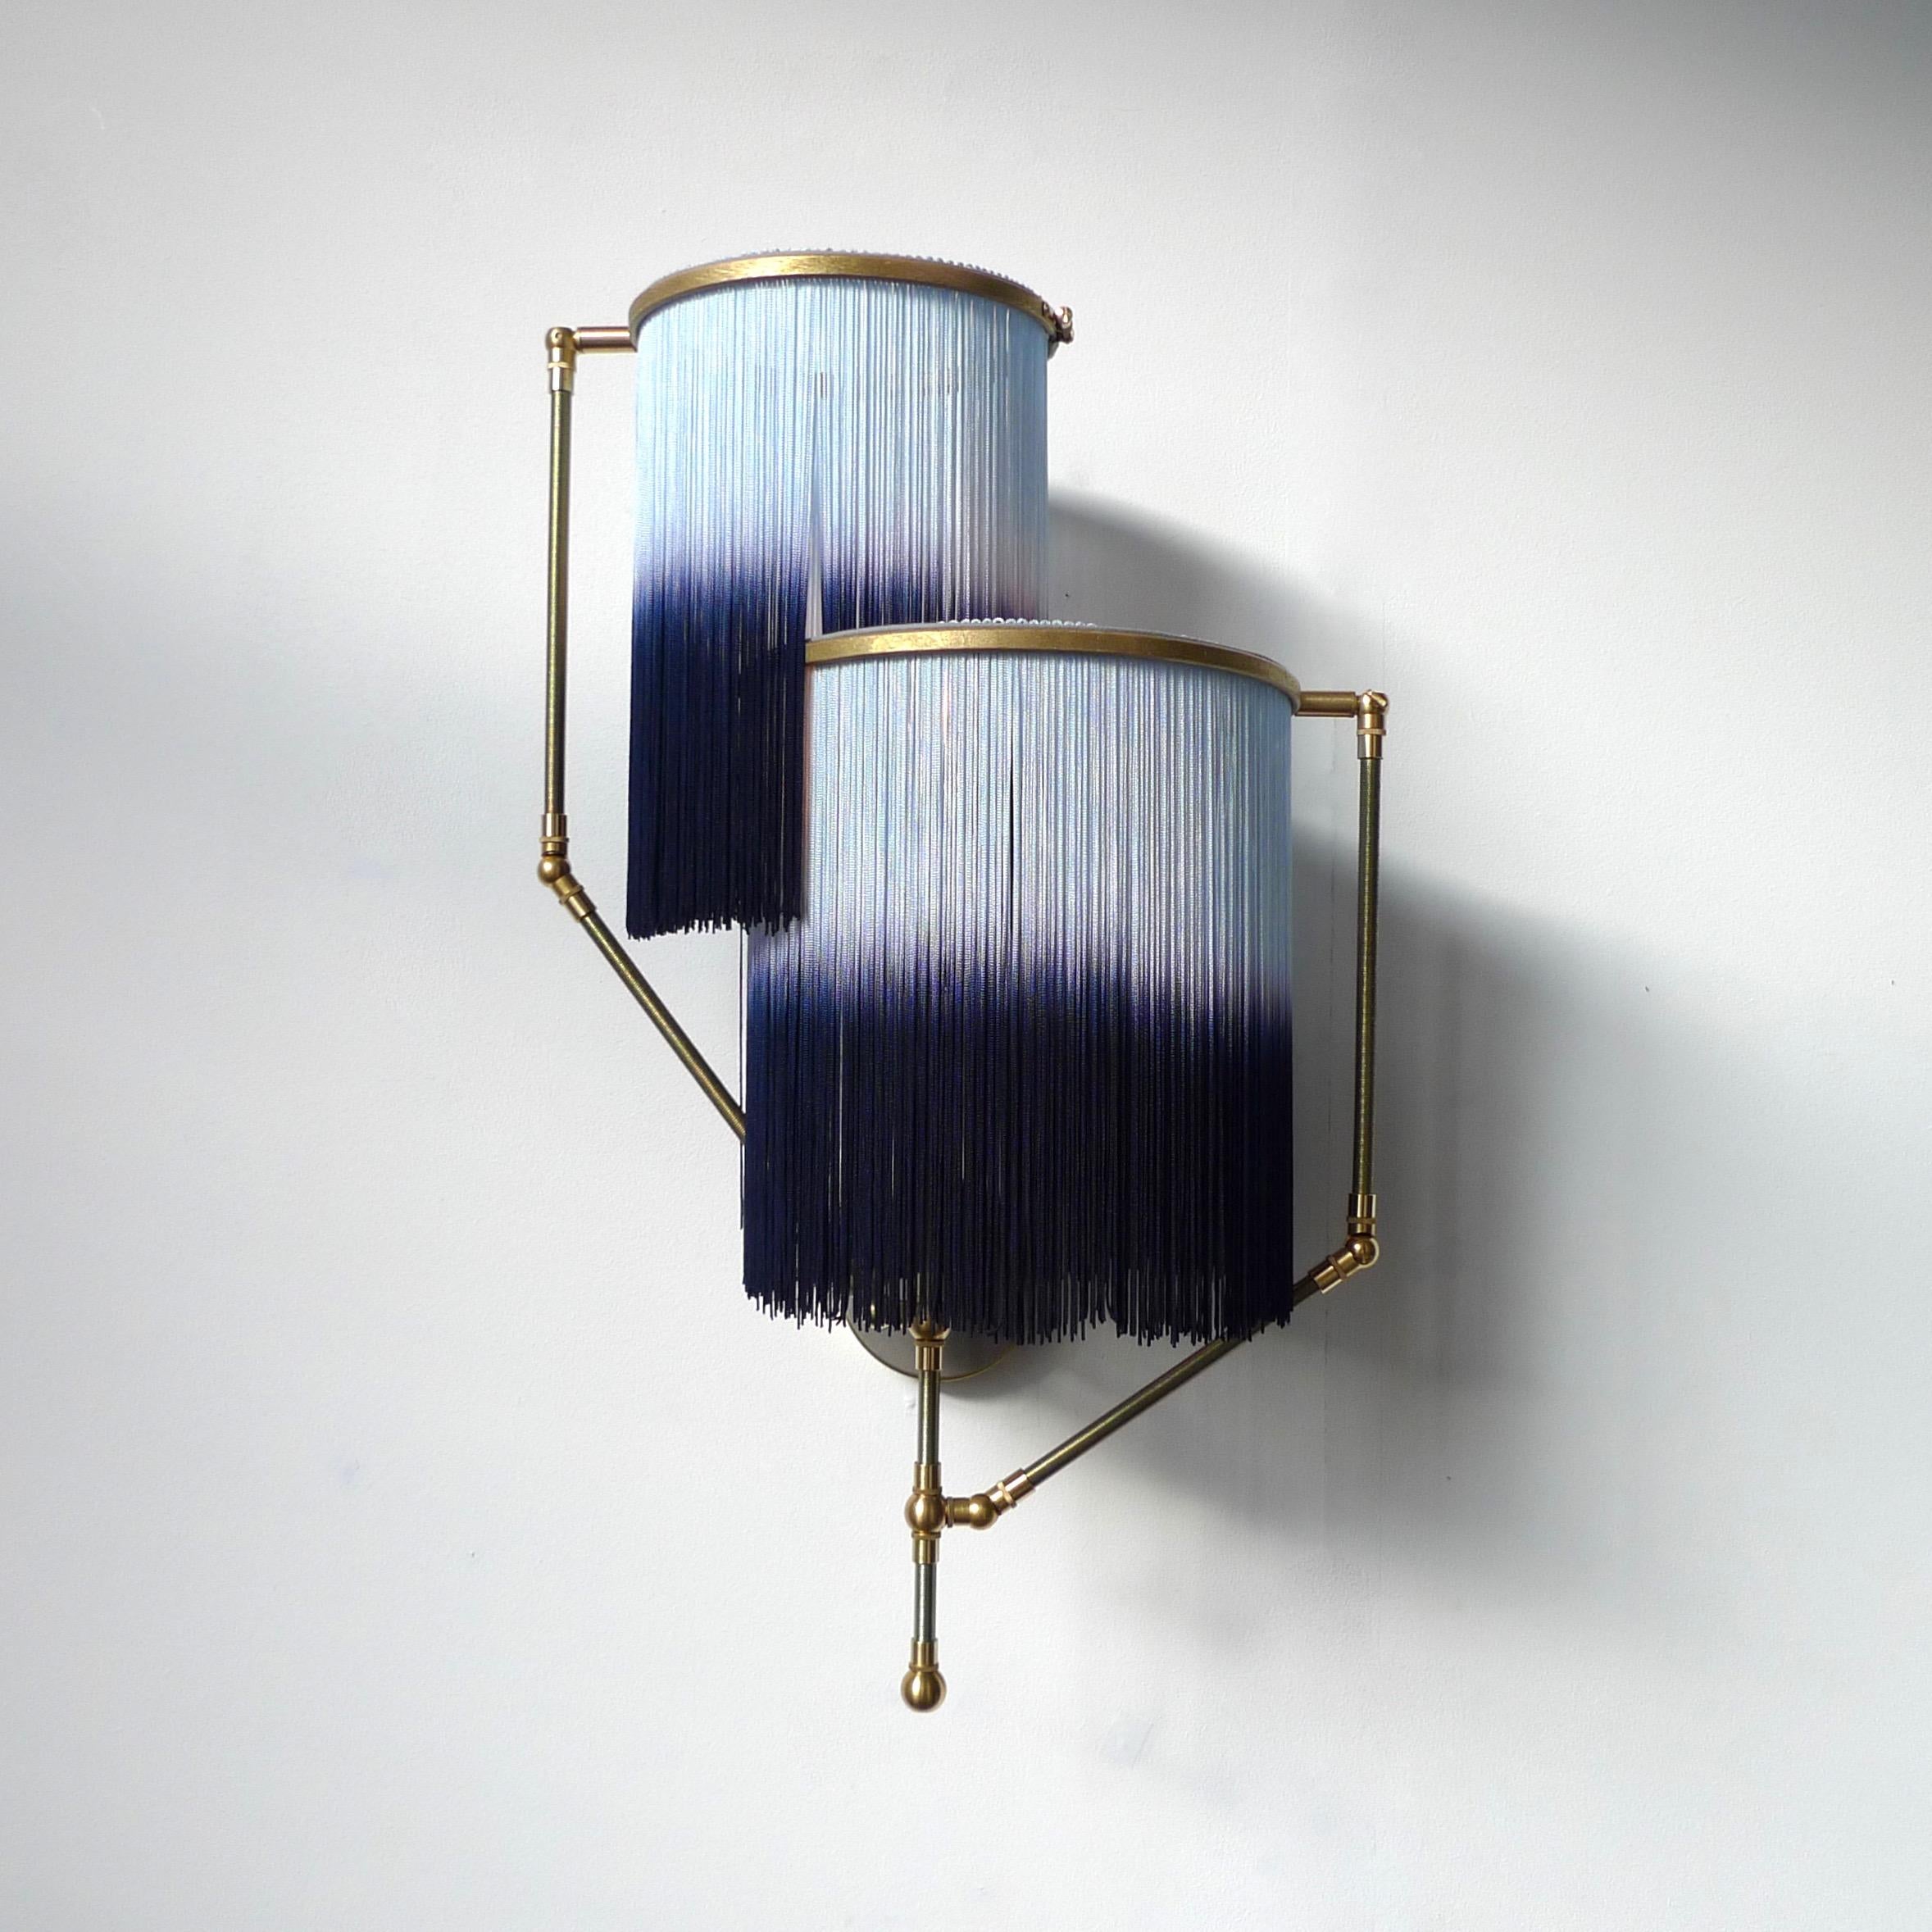 Blue Charme sconce lamp, Sander Bottinga

Dimensions: 50 x W 38 x D 27 cm.
Hand-sculpted in brass, leather, wood and dip dyed colored Fringes in viscose.
The movable arms makes it possible to move the circles with fringes in differed